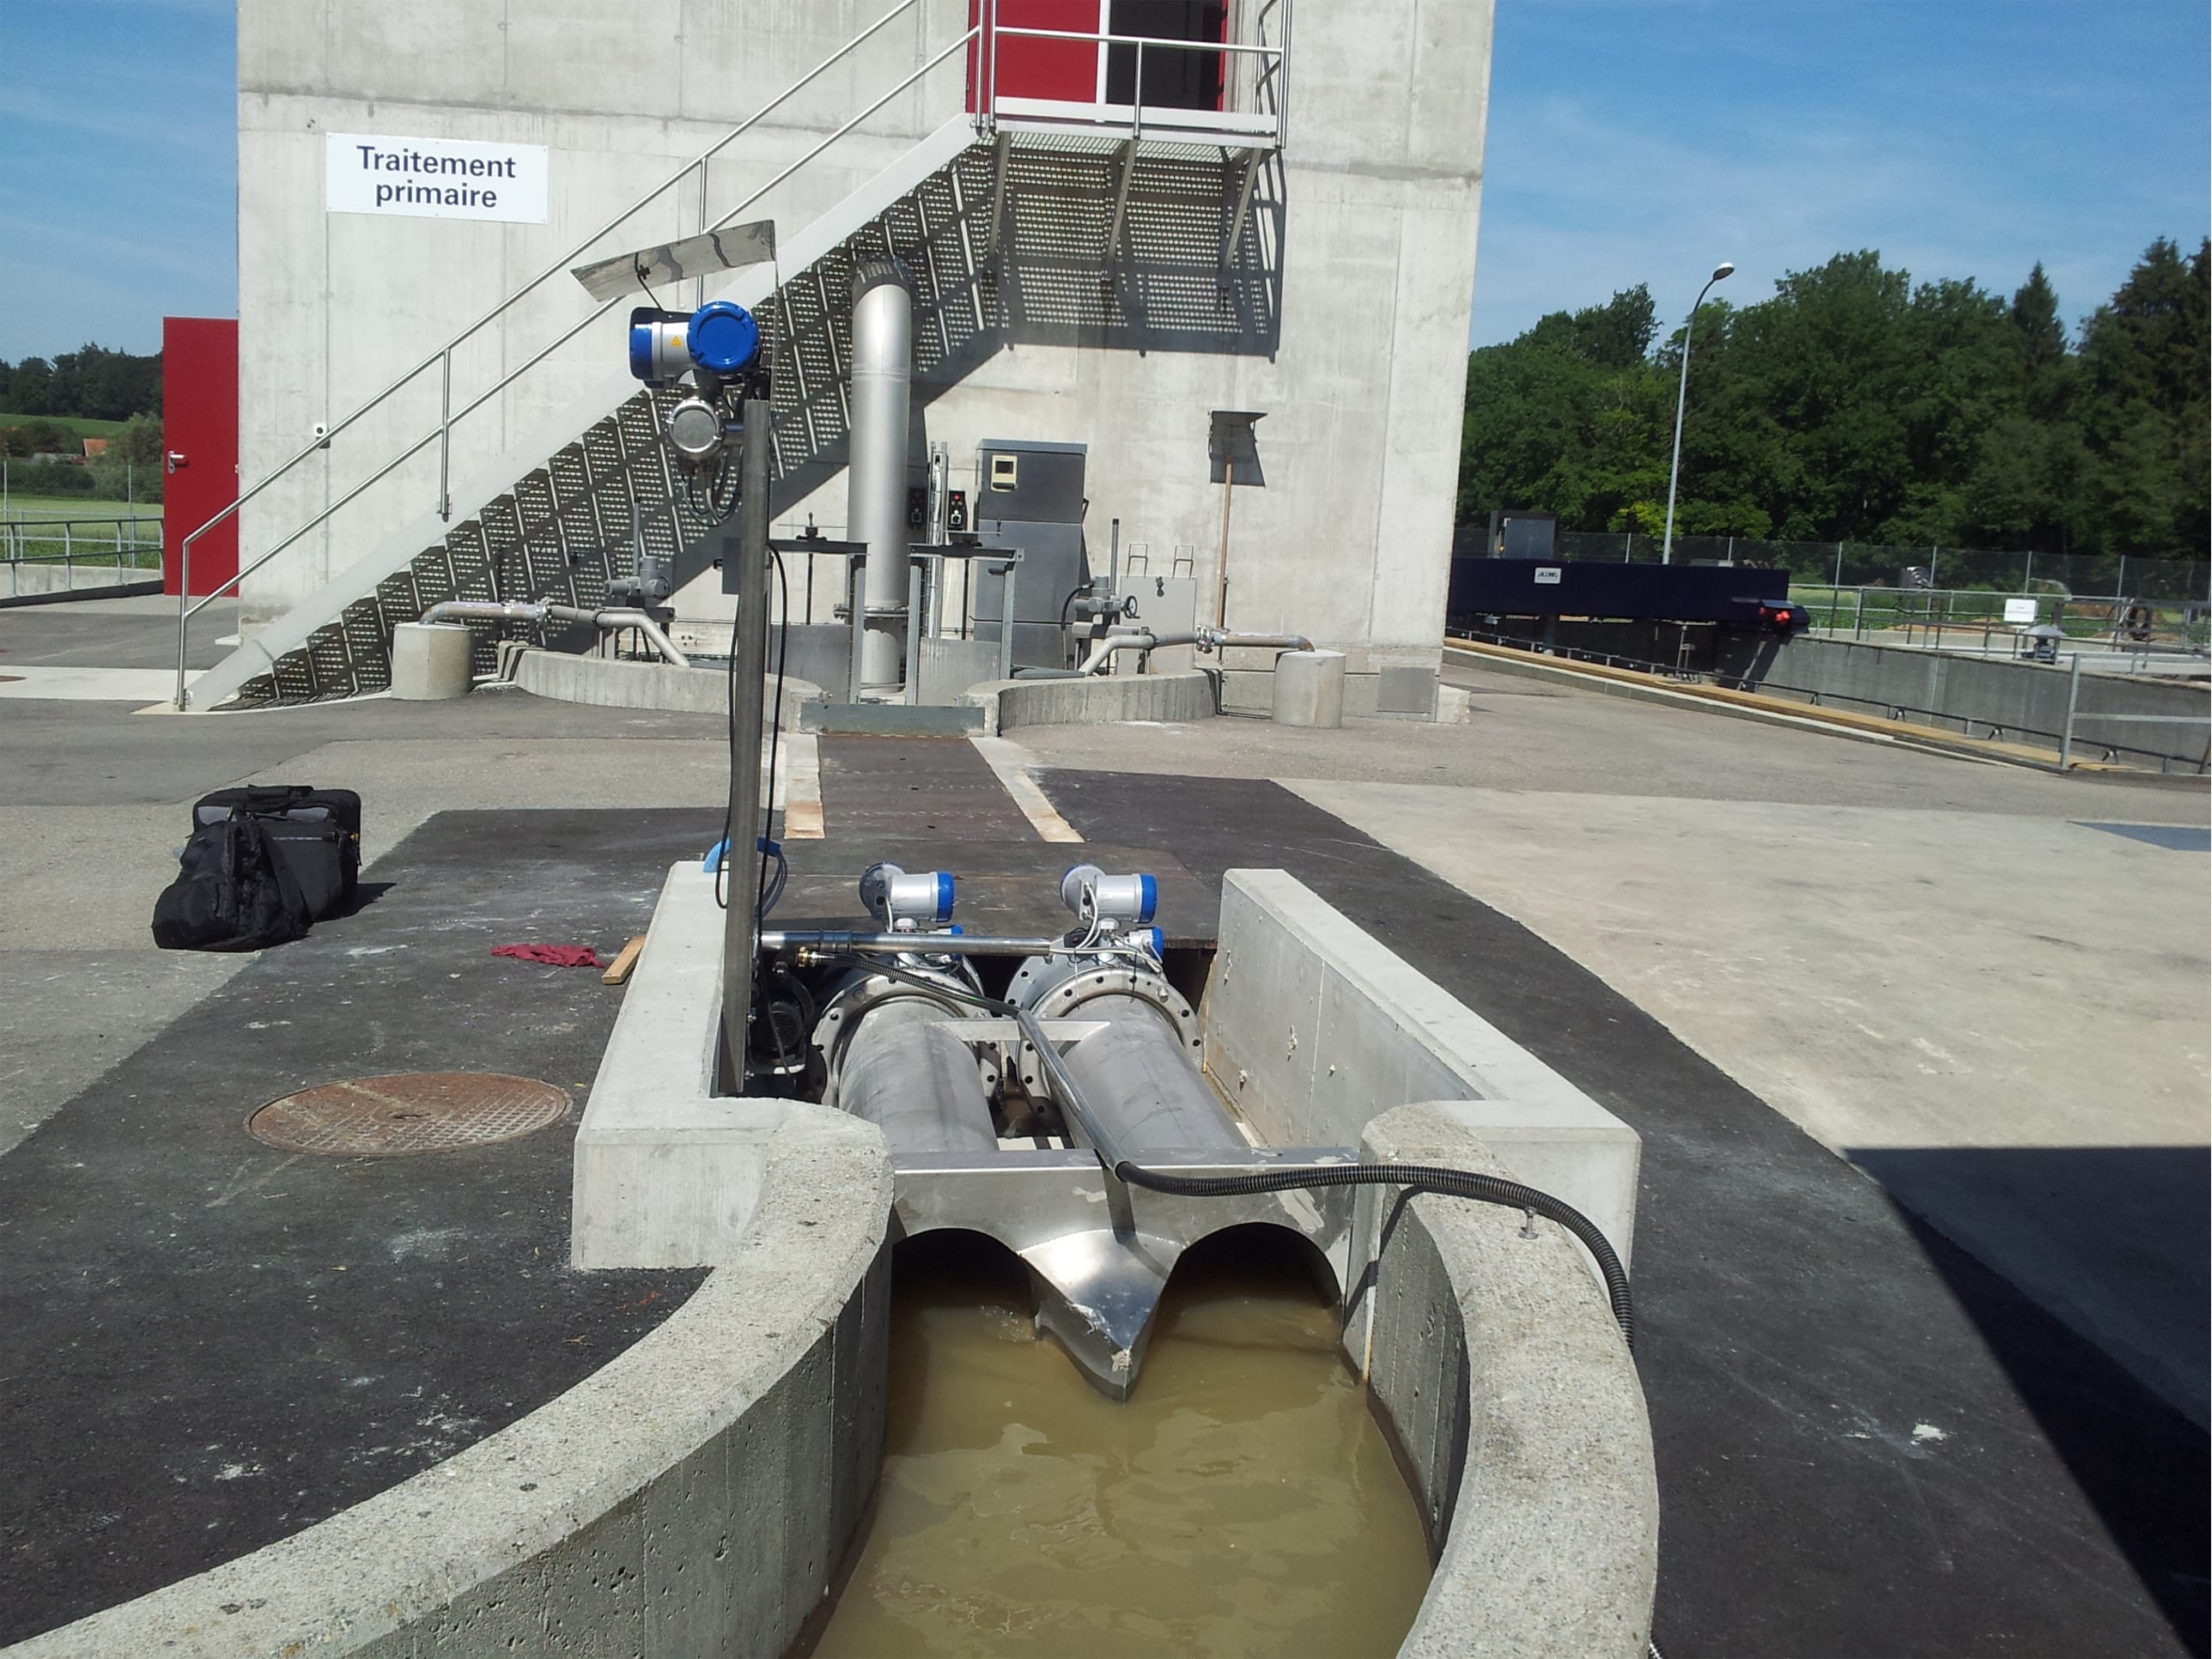 Inlet flow measurement in the open channel of a sewage treatment plant